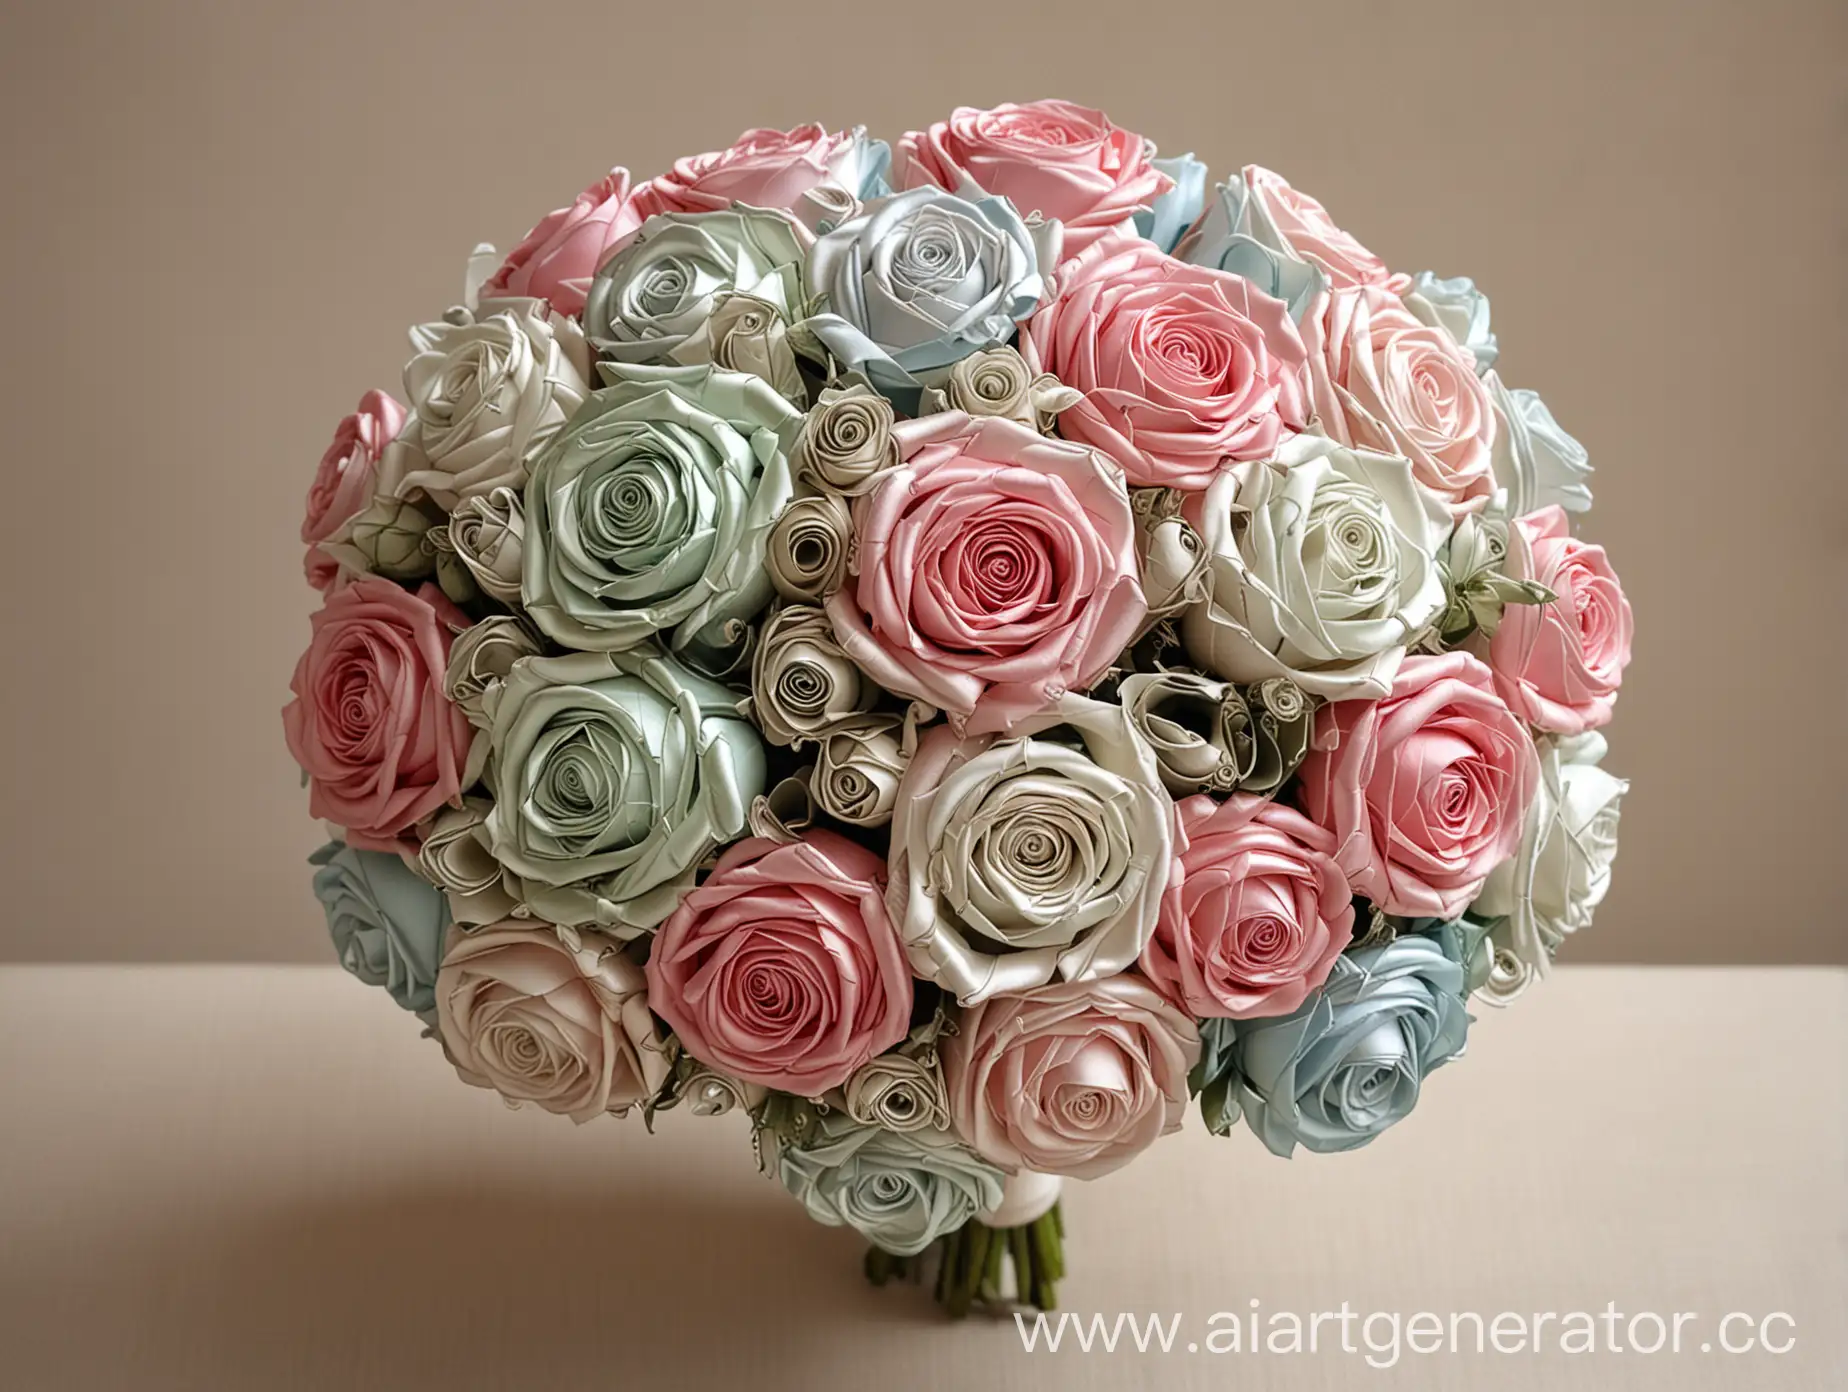 Bouquet-of-Roses-Made-from-Atlas-Ribbons-Elegant-Floral-Arrangement-for-Special-Occasions